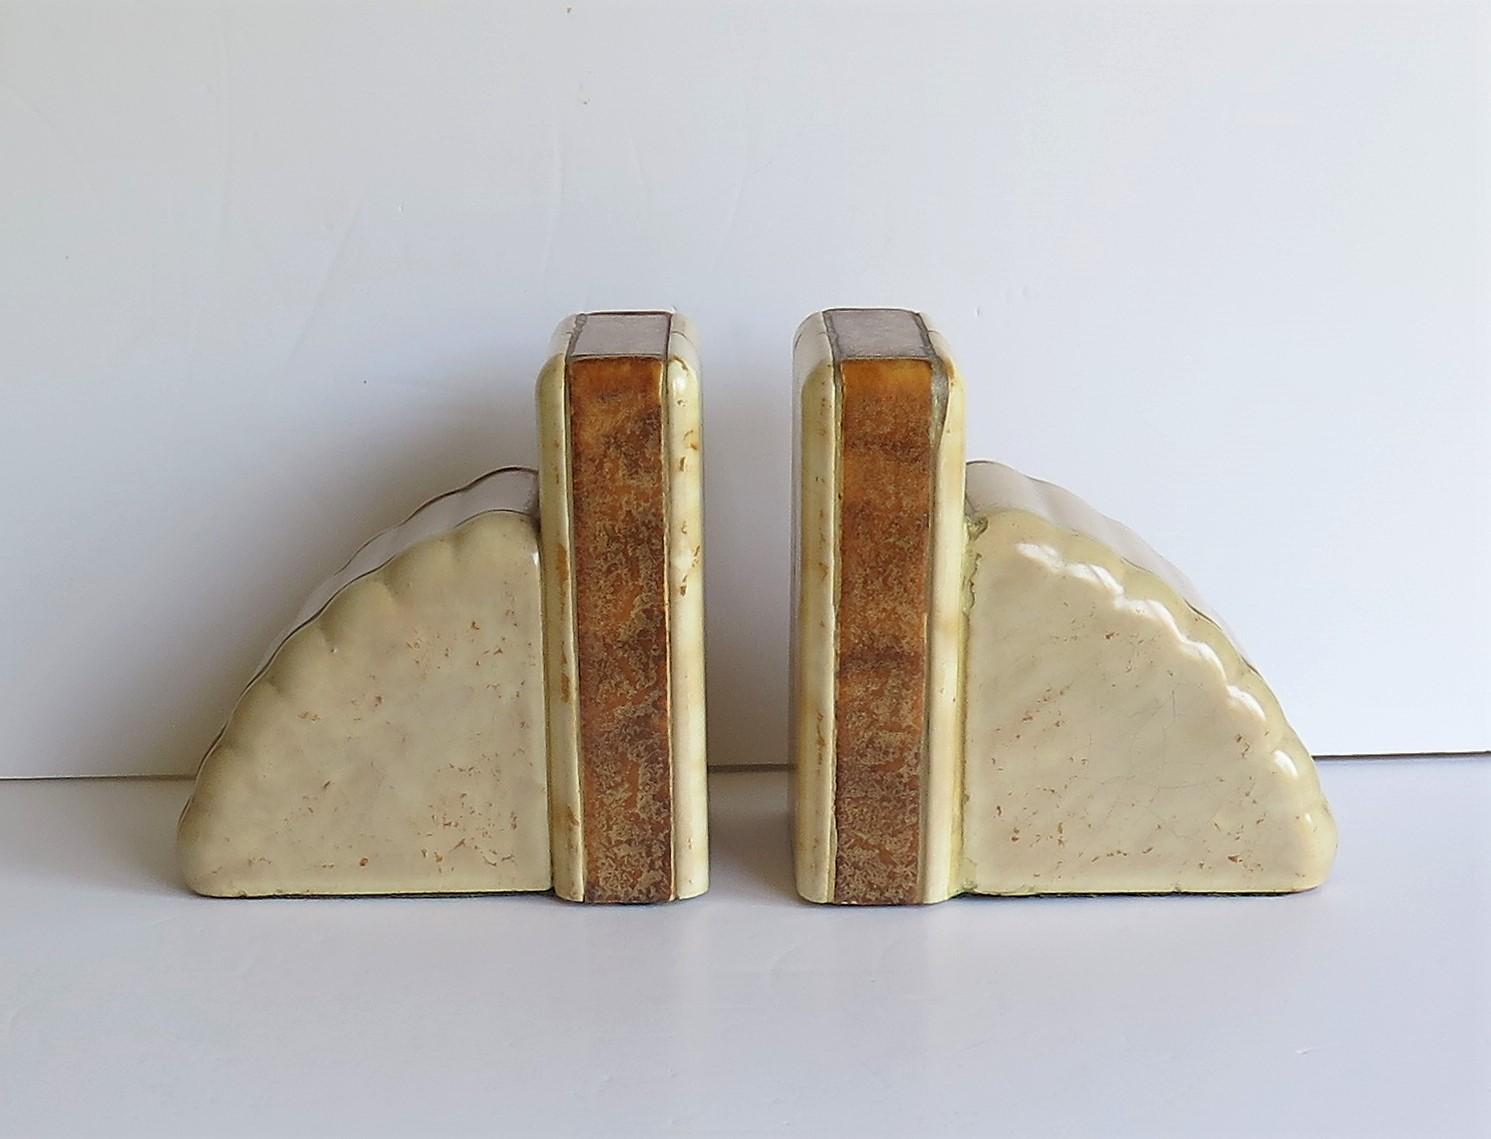 These are a pair of fine quality hand carved Marble Book Ends, probably French that we date to the Art Deco Period, circa 1920s.

These are very substantial, heavy and well handmade bookends.

They are handmade using two different types of colored